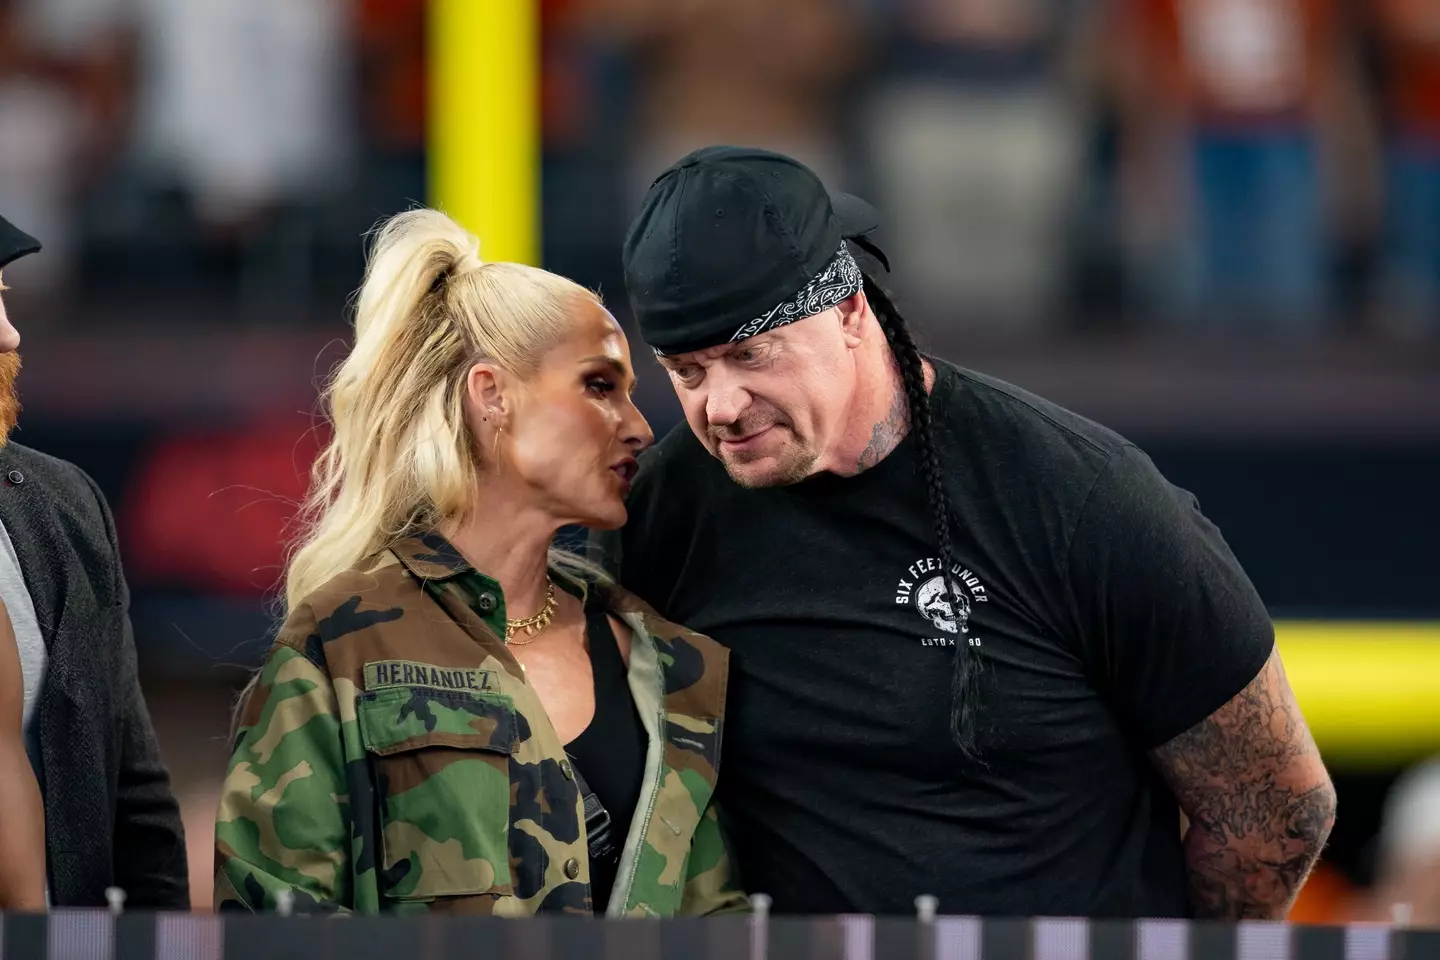 McCool is The Undertaker's third wife (Getty)